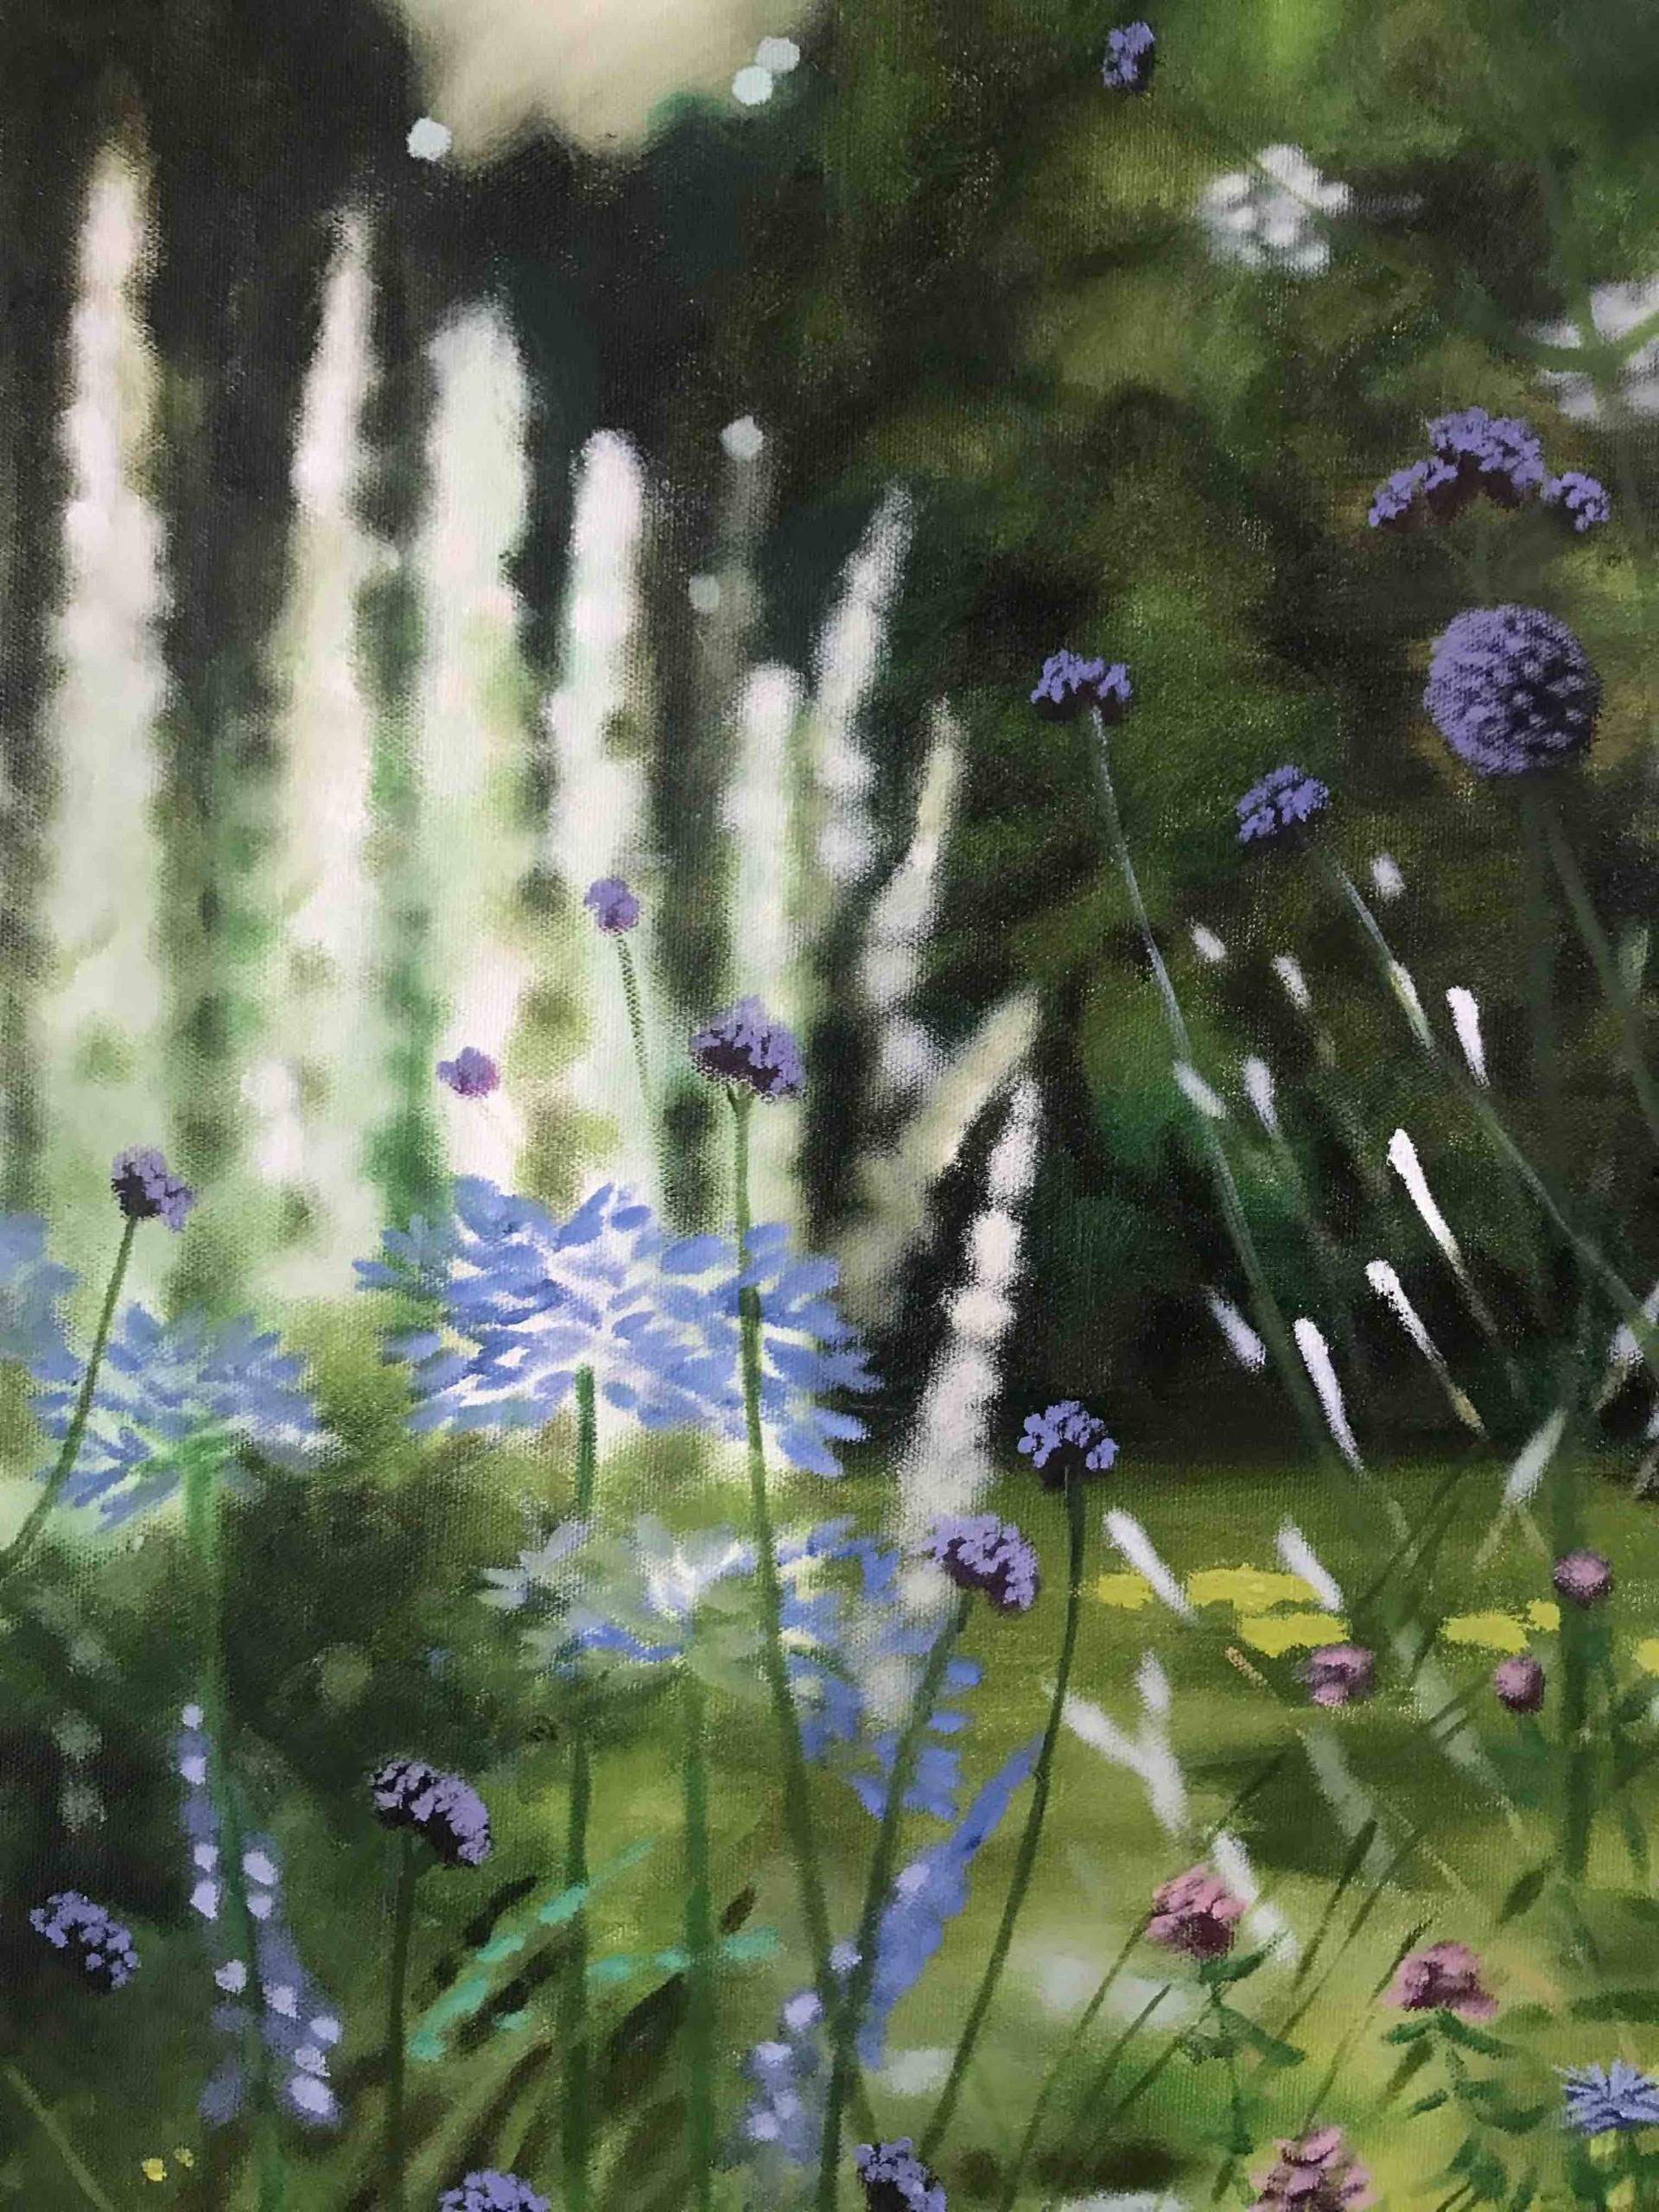 Dorset Summer Garden, Original painting, Landscape, Nature, plants, Flowers  - Contemporary Painting by Dylan Lloyd